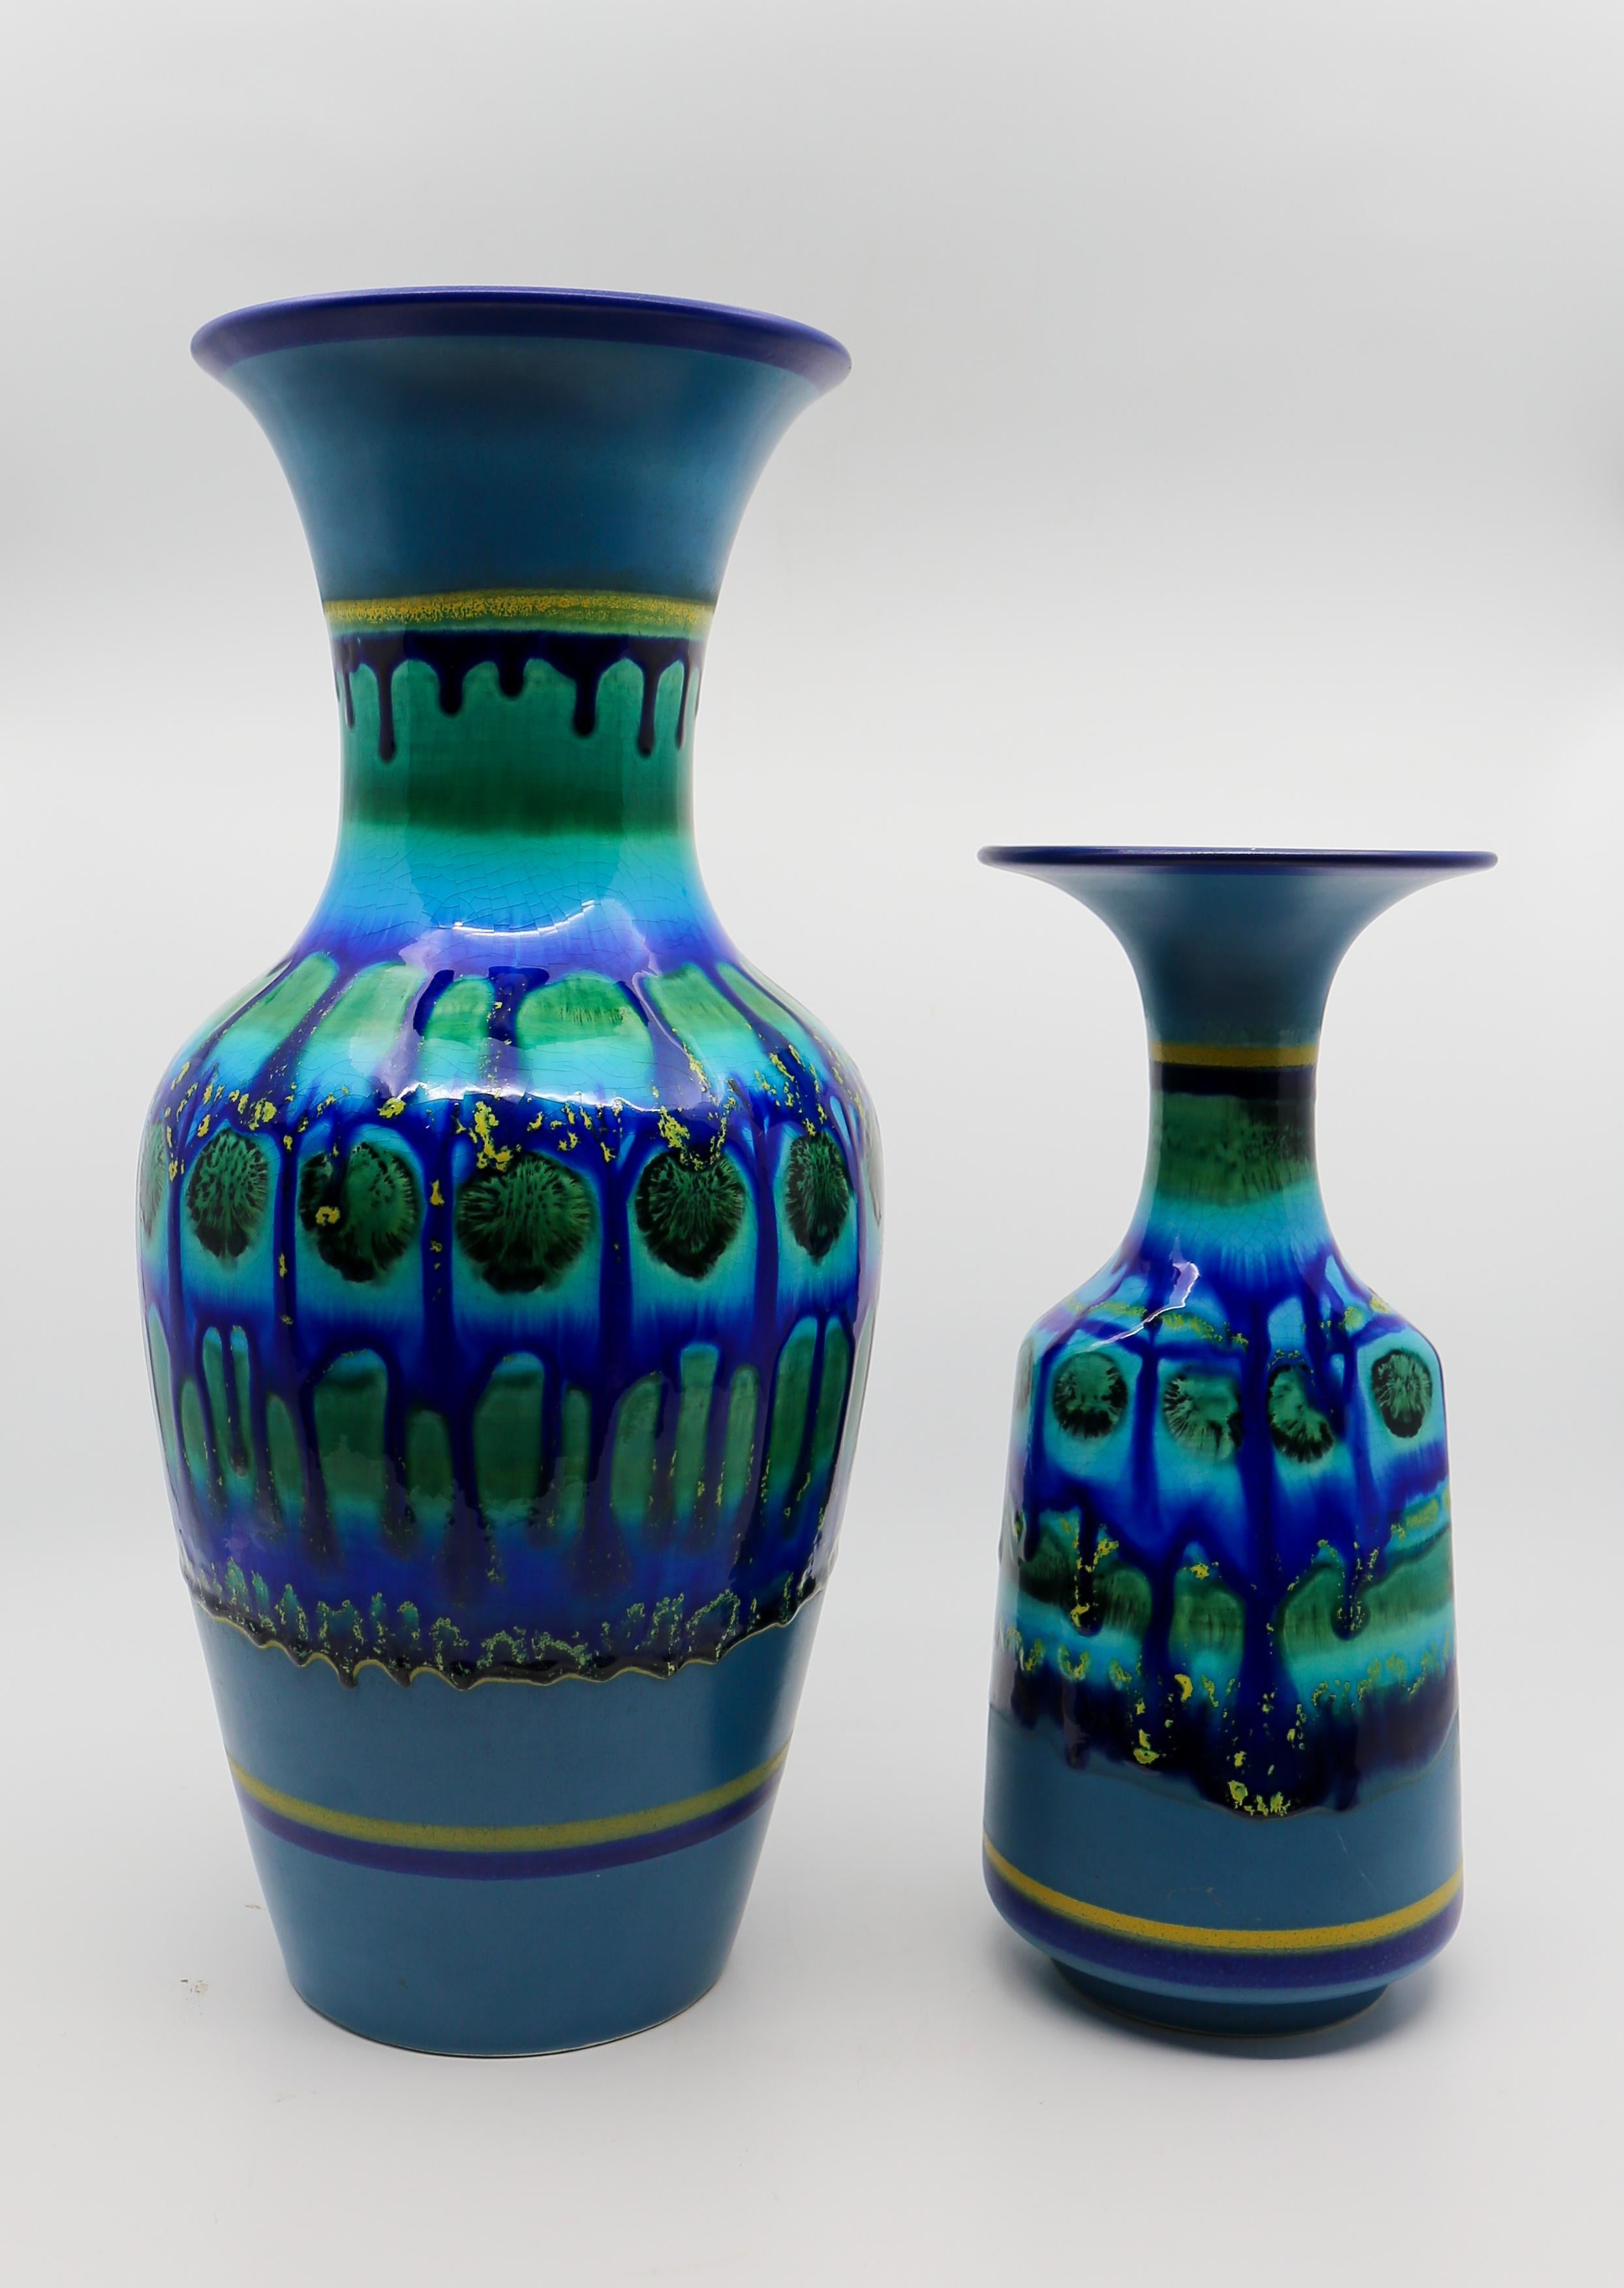 Two vintage blue ceramic fat lava style vases marked on base: Flora Holland.
Hand Painted.  

Height 38 cm. Diameter 17 cm.
Height 27 cm. Diameter 12 cm.
Please note that price is per item not for the set.

Flora Holland - Gouda porcelain factory